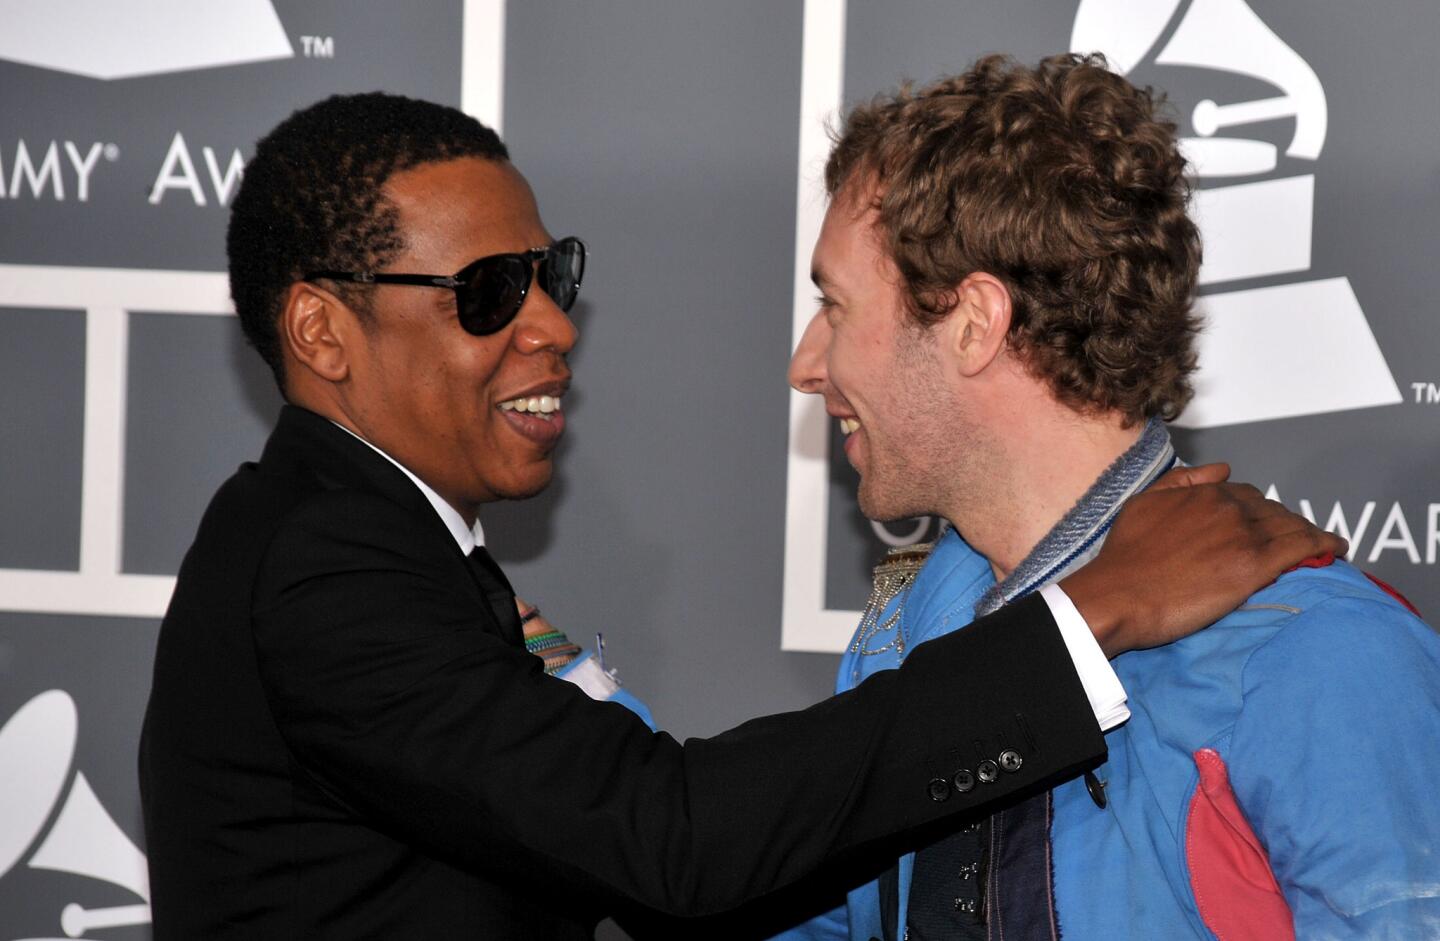 Jay-Z and Coldplay: "Lost"